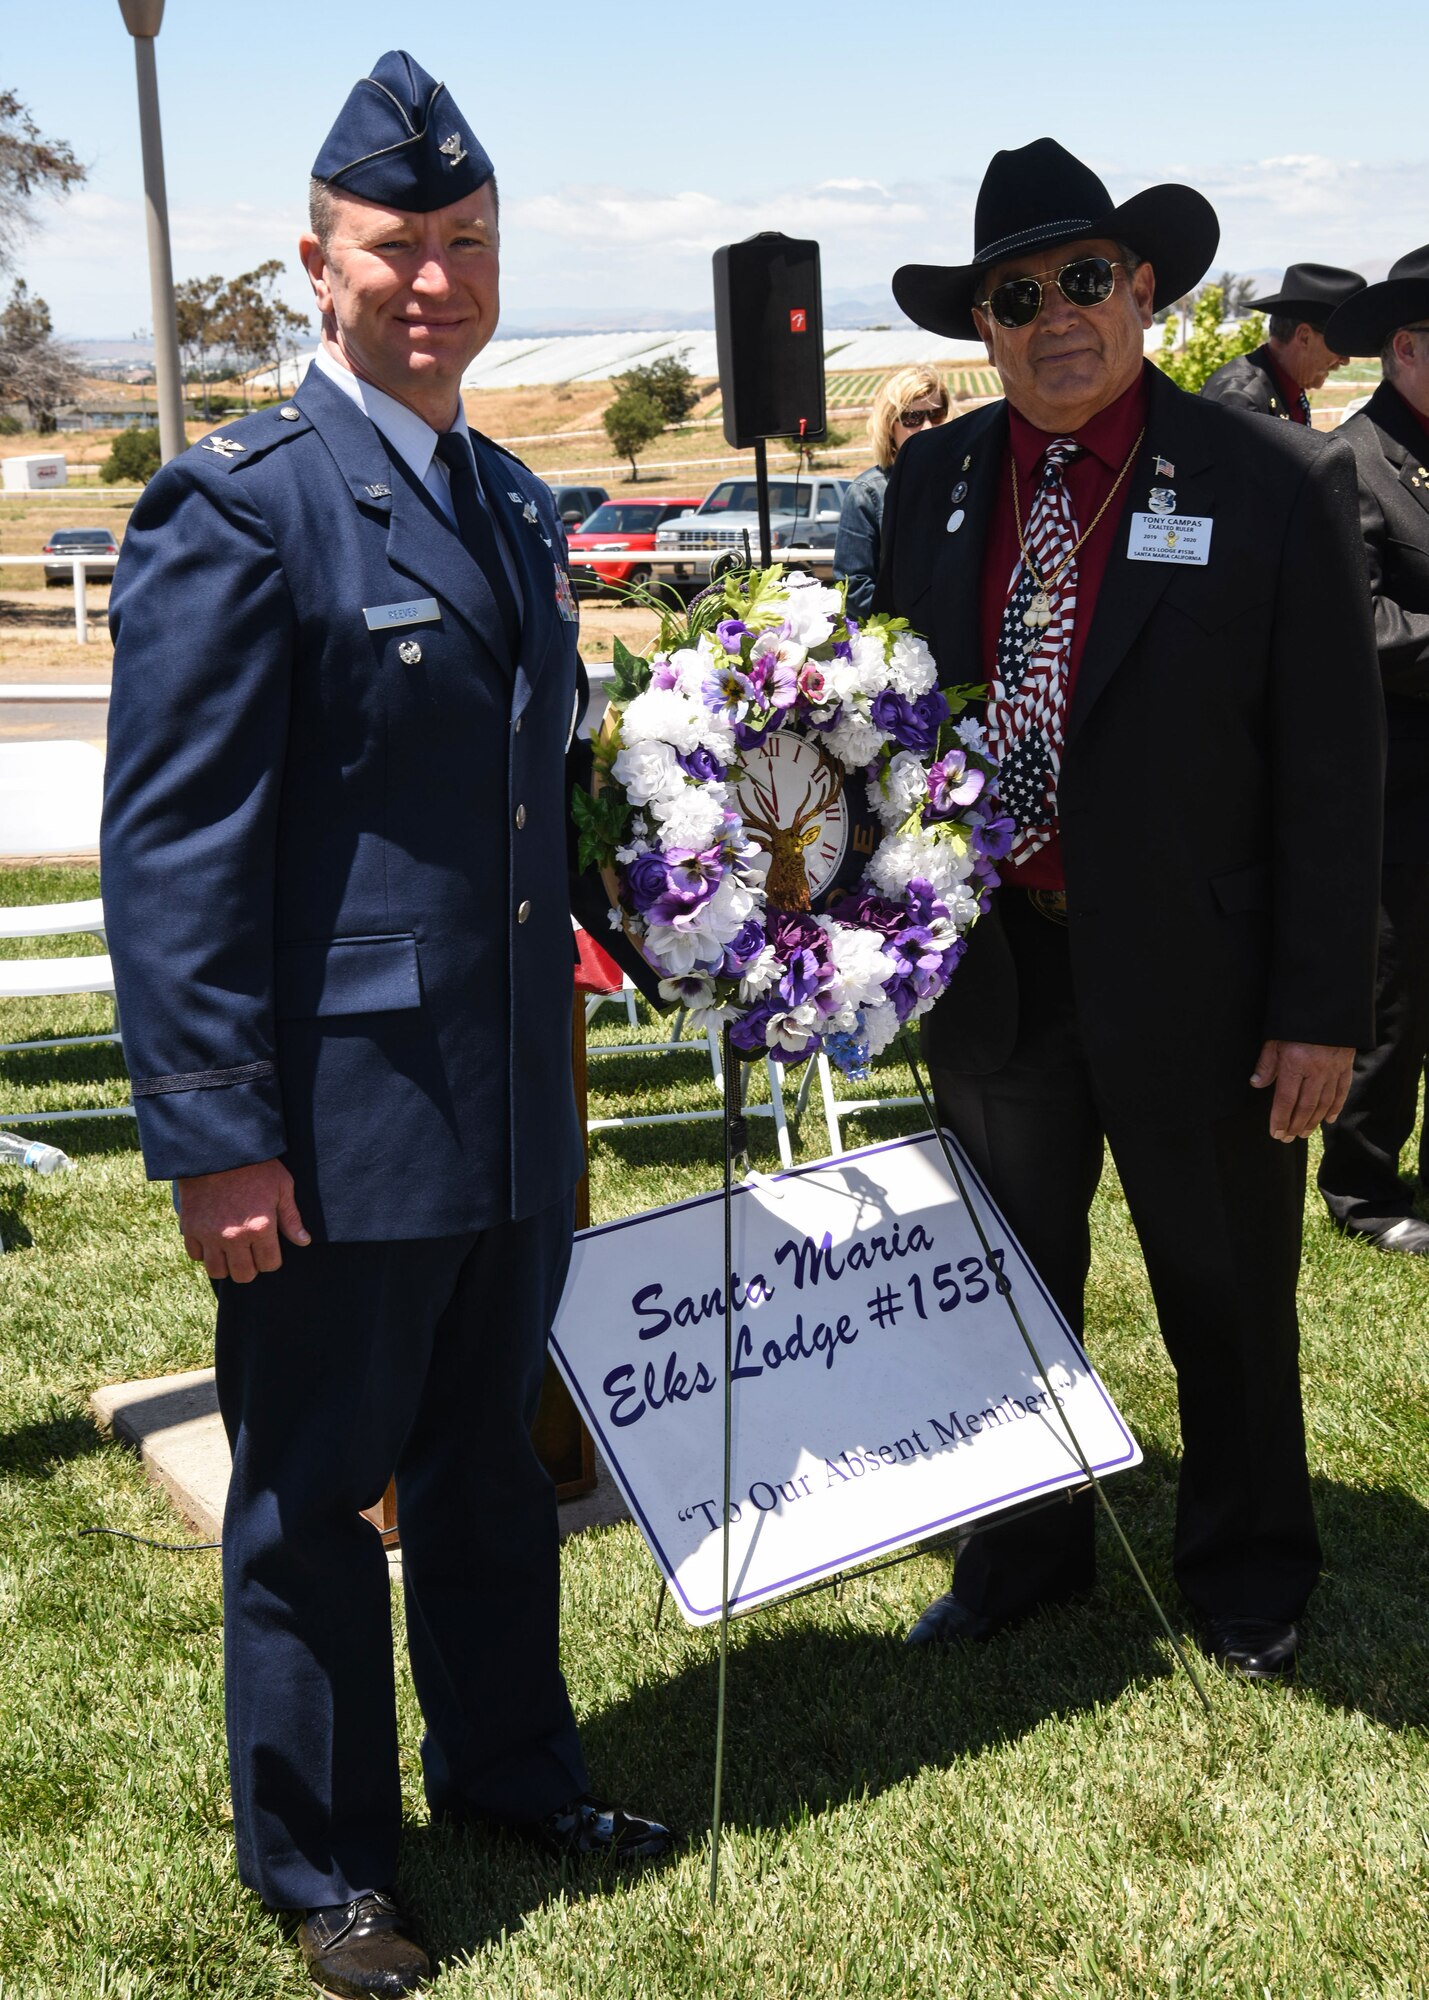 Col. Bob Reeves, 30th Space Wing vice commander poses with Tony Campas, Santa Maria Elks Lodge exalted ruler during a Memorial Day ceremony held at the Elks Rodeo grounds in Sana Maria, Calif.